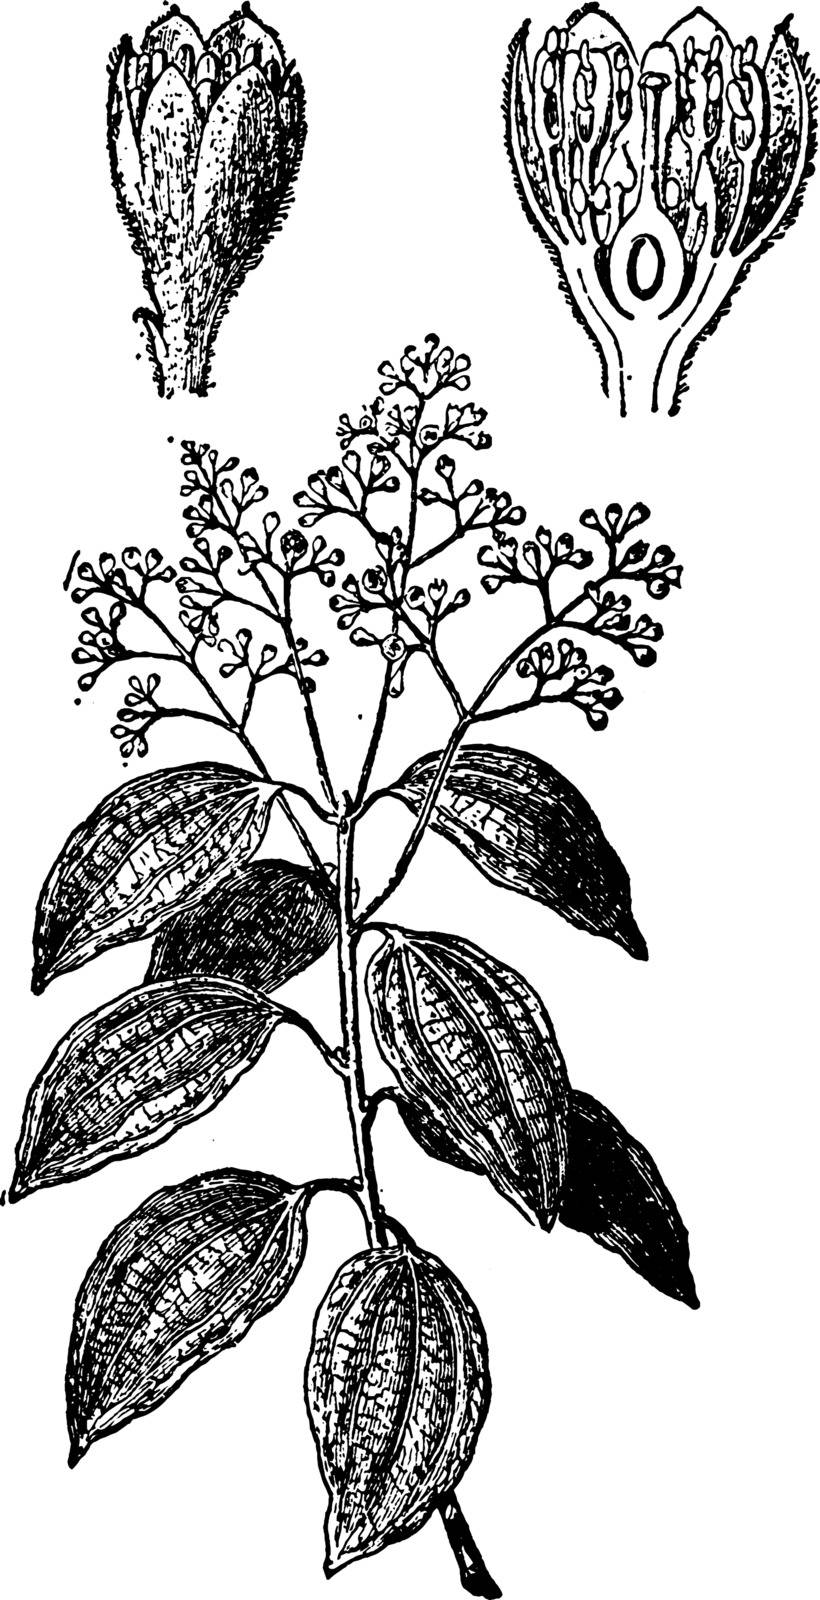 A picture of cinnamon plant showing different parts of plants which include ovary, buds and flower, vintage line drawing or engraving illustration.